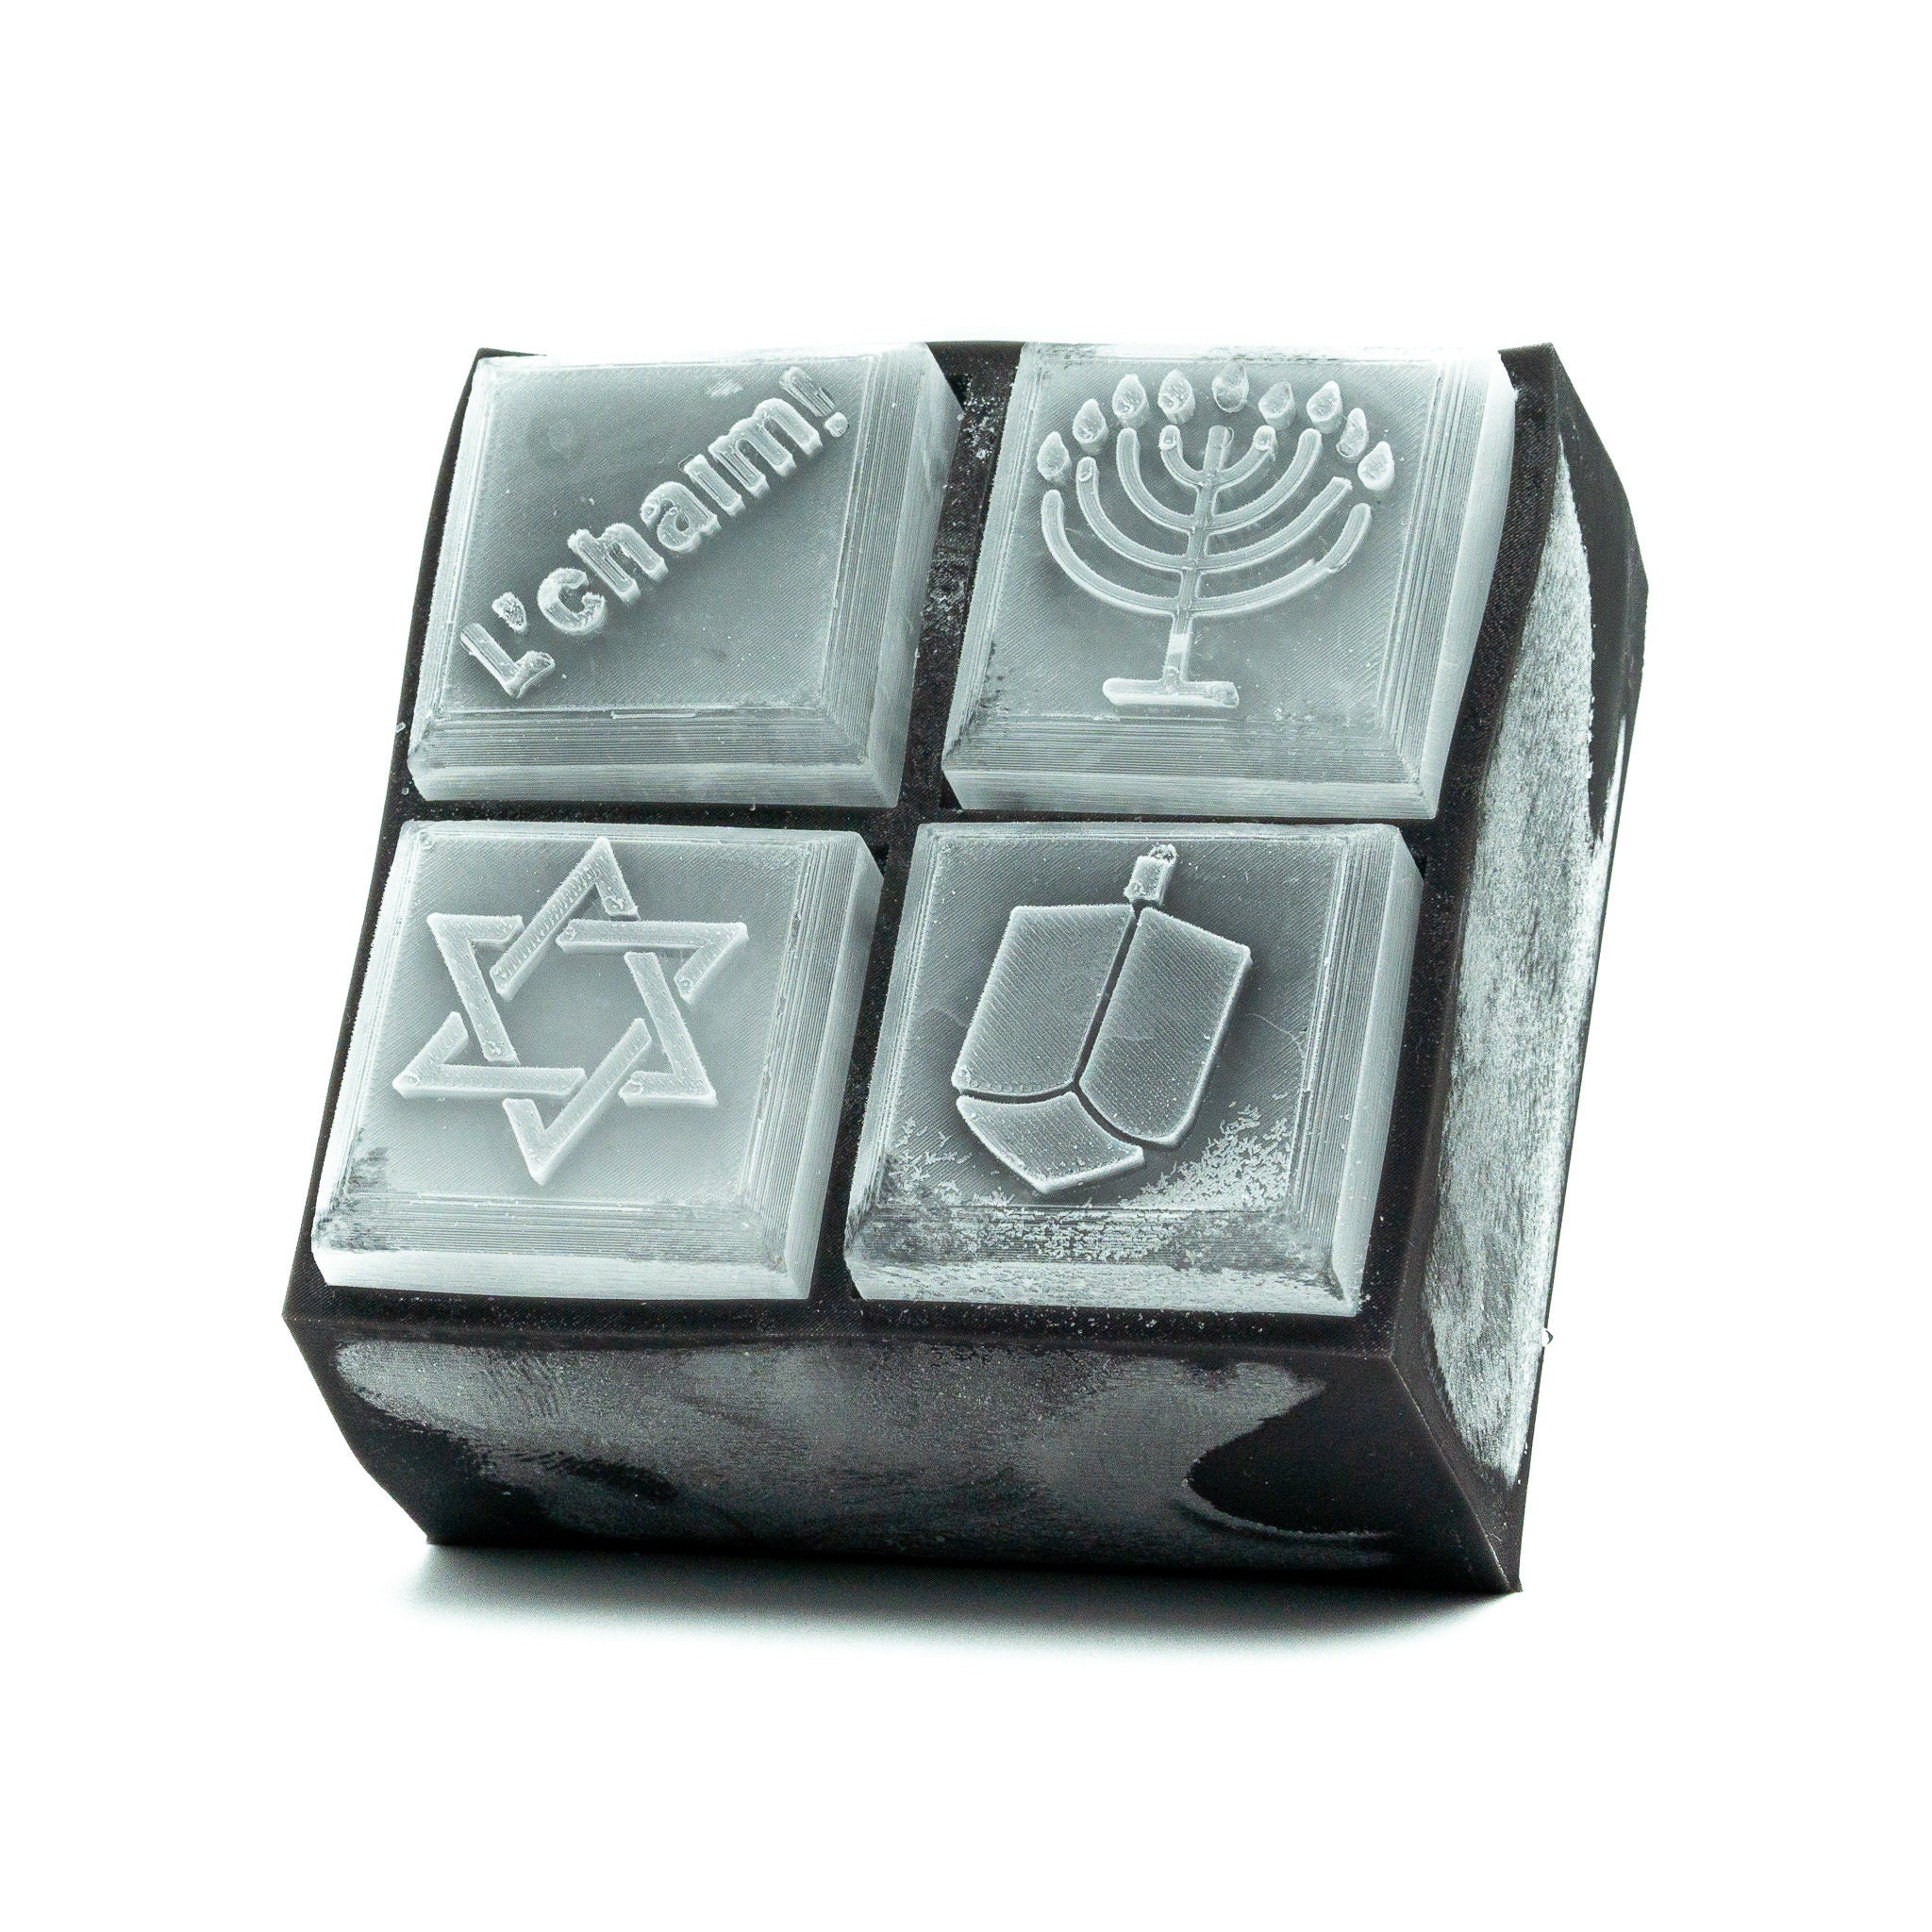 Halloween Ice Cube Tray Whiskey Rocks Embossed With Spooky Designs  Halloween Party Idea, Gift for Goblins and Ghouls 